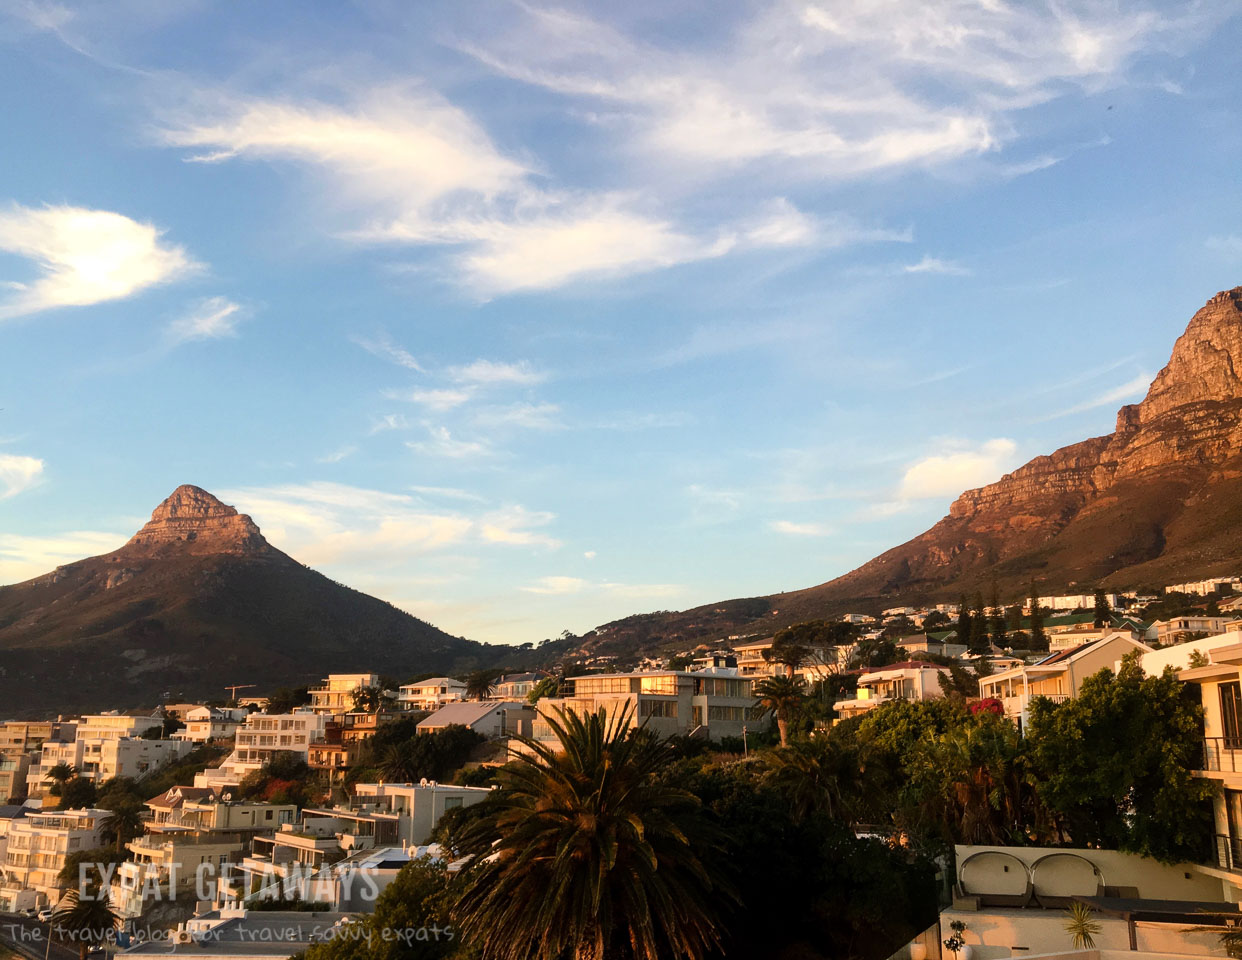 The view from our wonderful apartment in Camps Bay. Ocean views from our balcony and spectacular sunsets with Lions Head as a backdrop. Expat Getaways One Week in Cape Town, South Africa. 